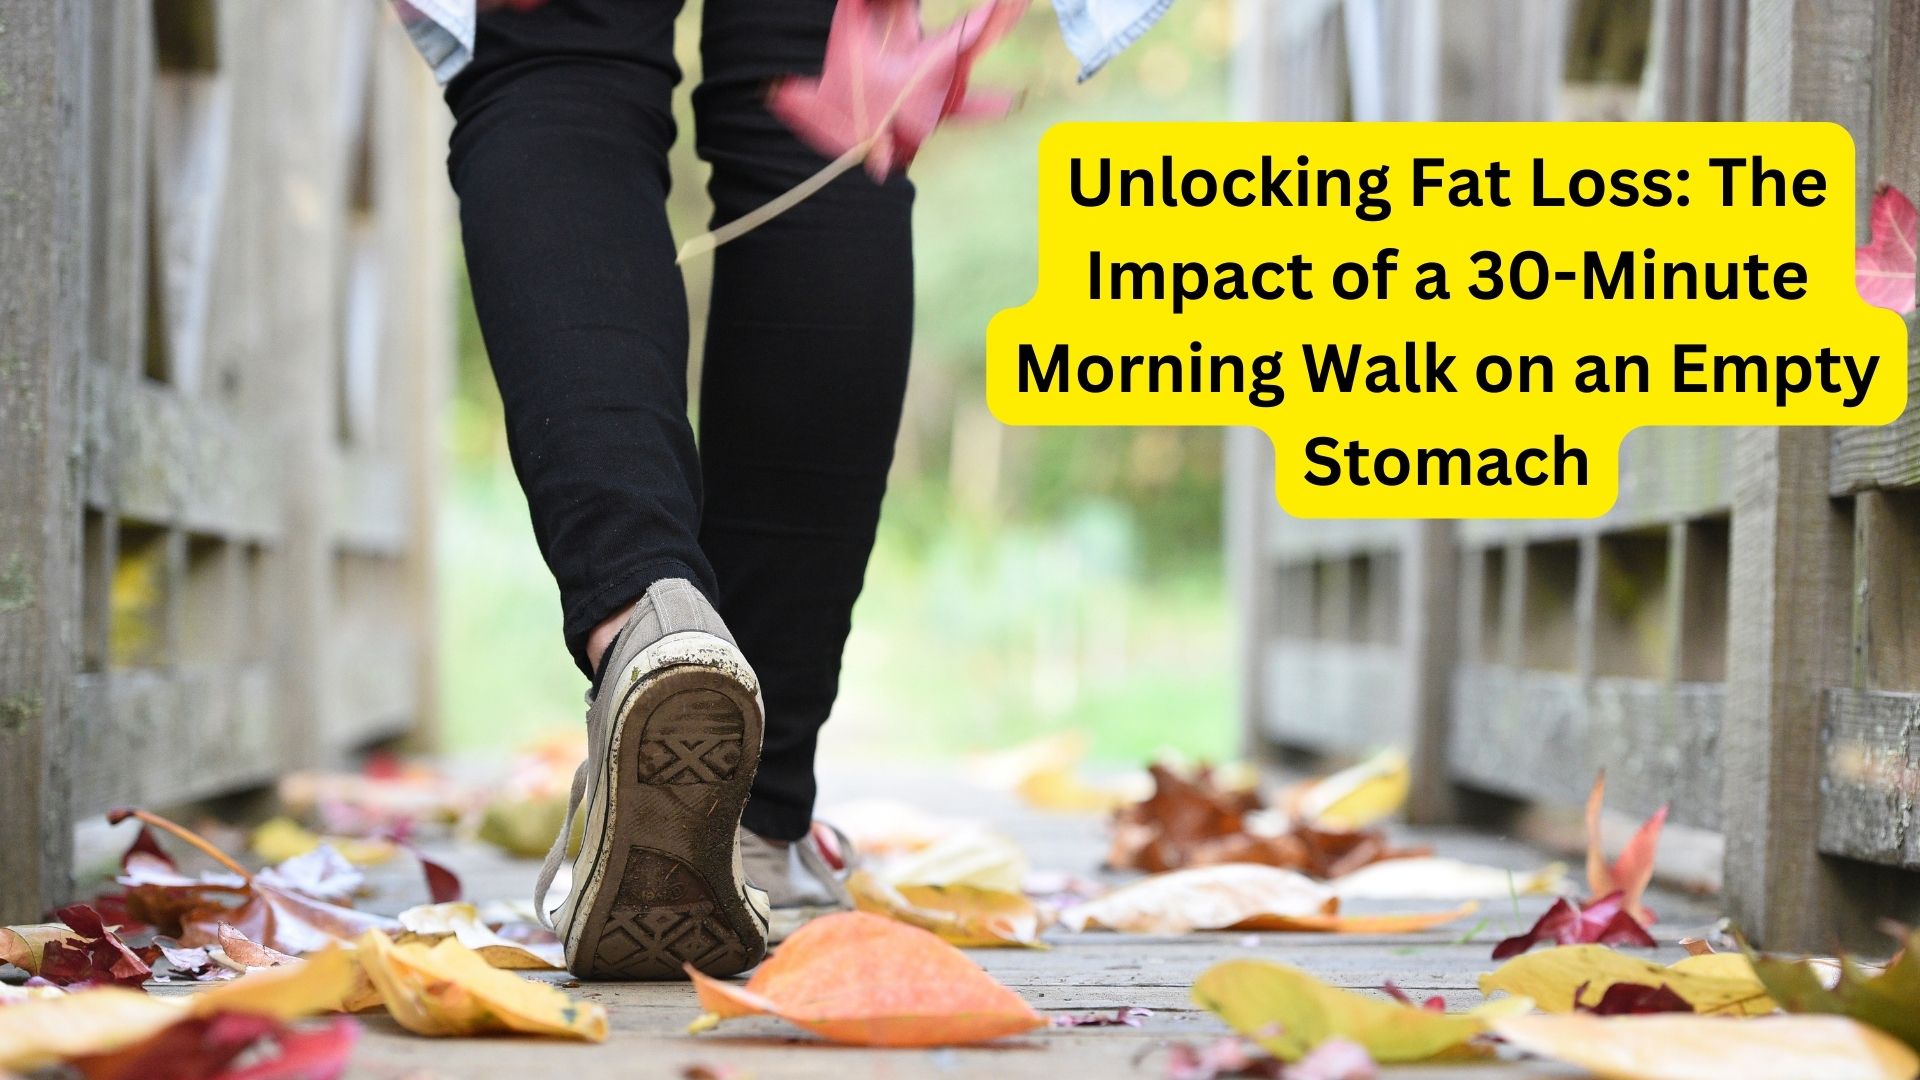 Unlocking Fat Loss: The Impact of a 30-Minute Morning Walk on an Empty Stomach